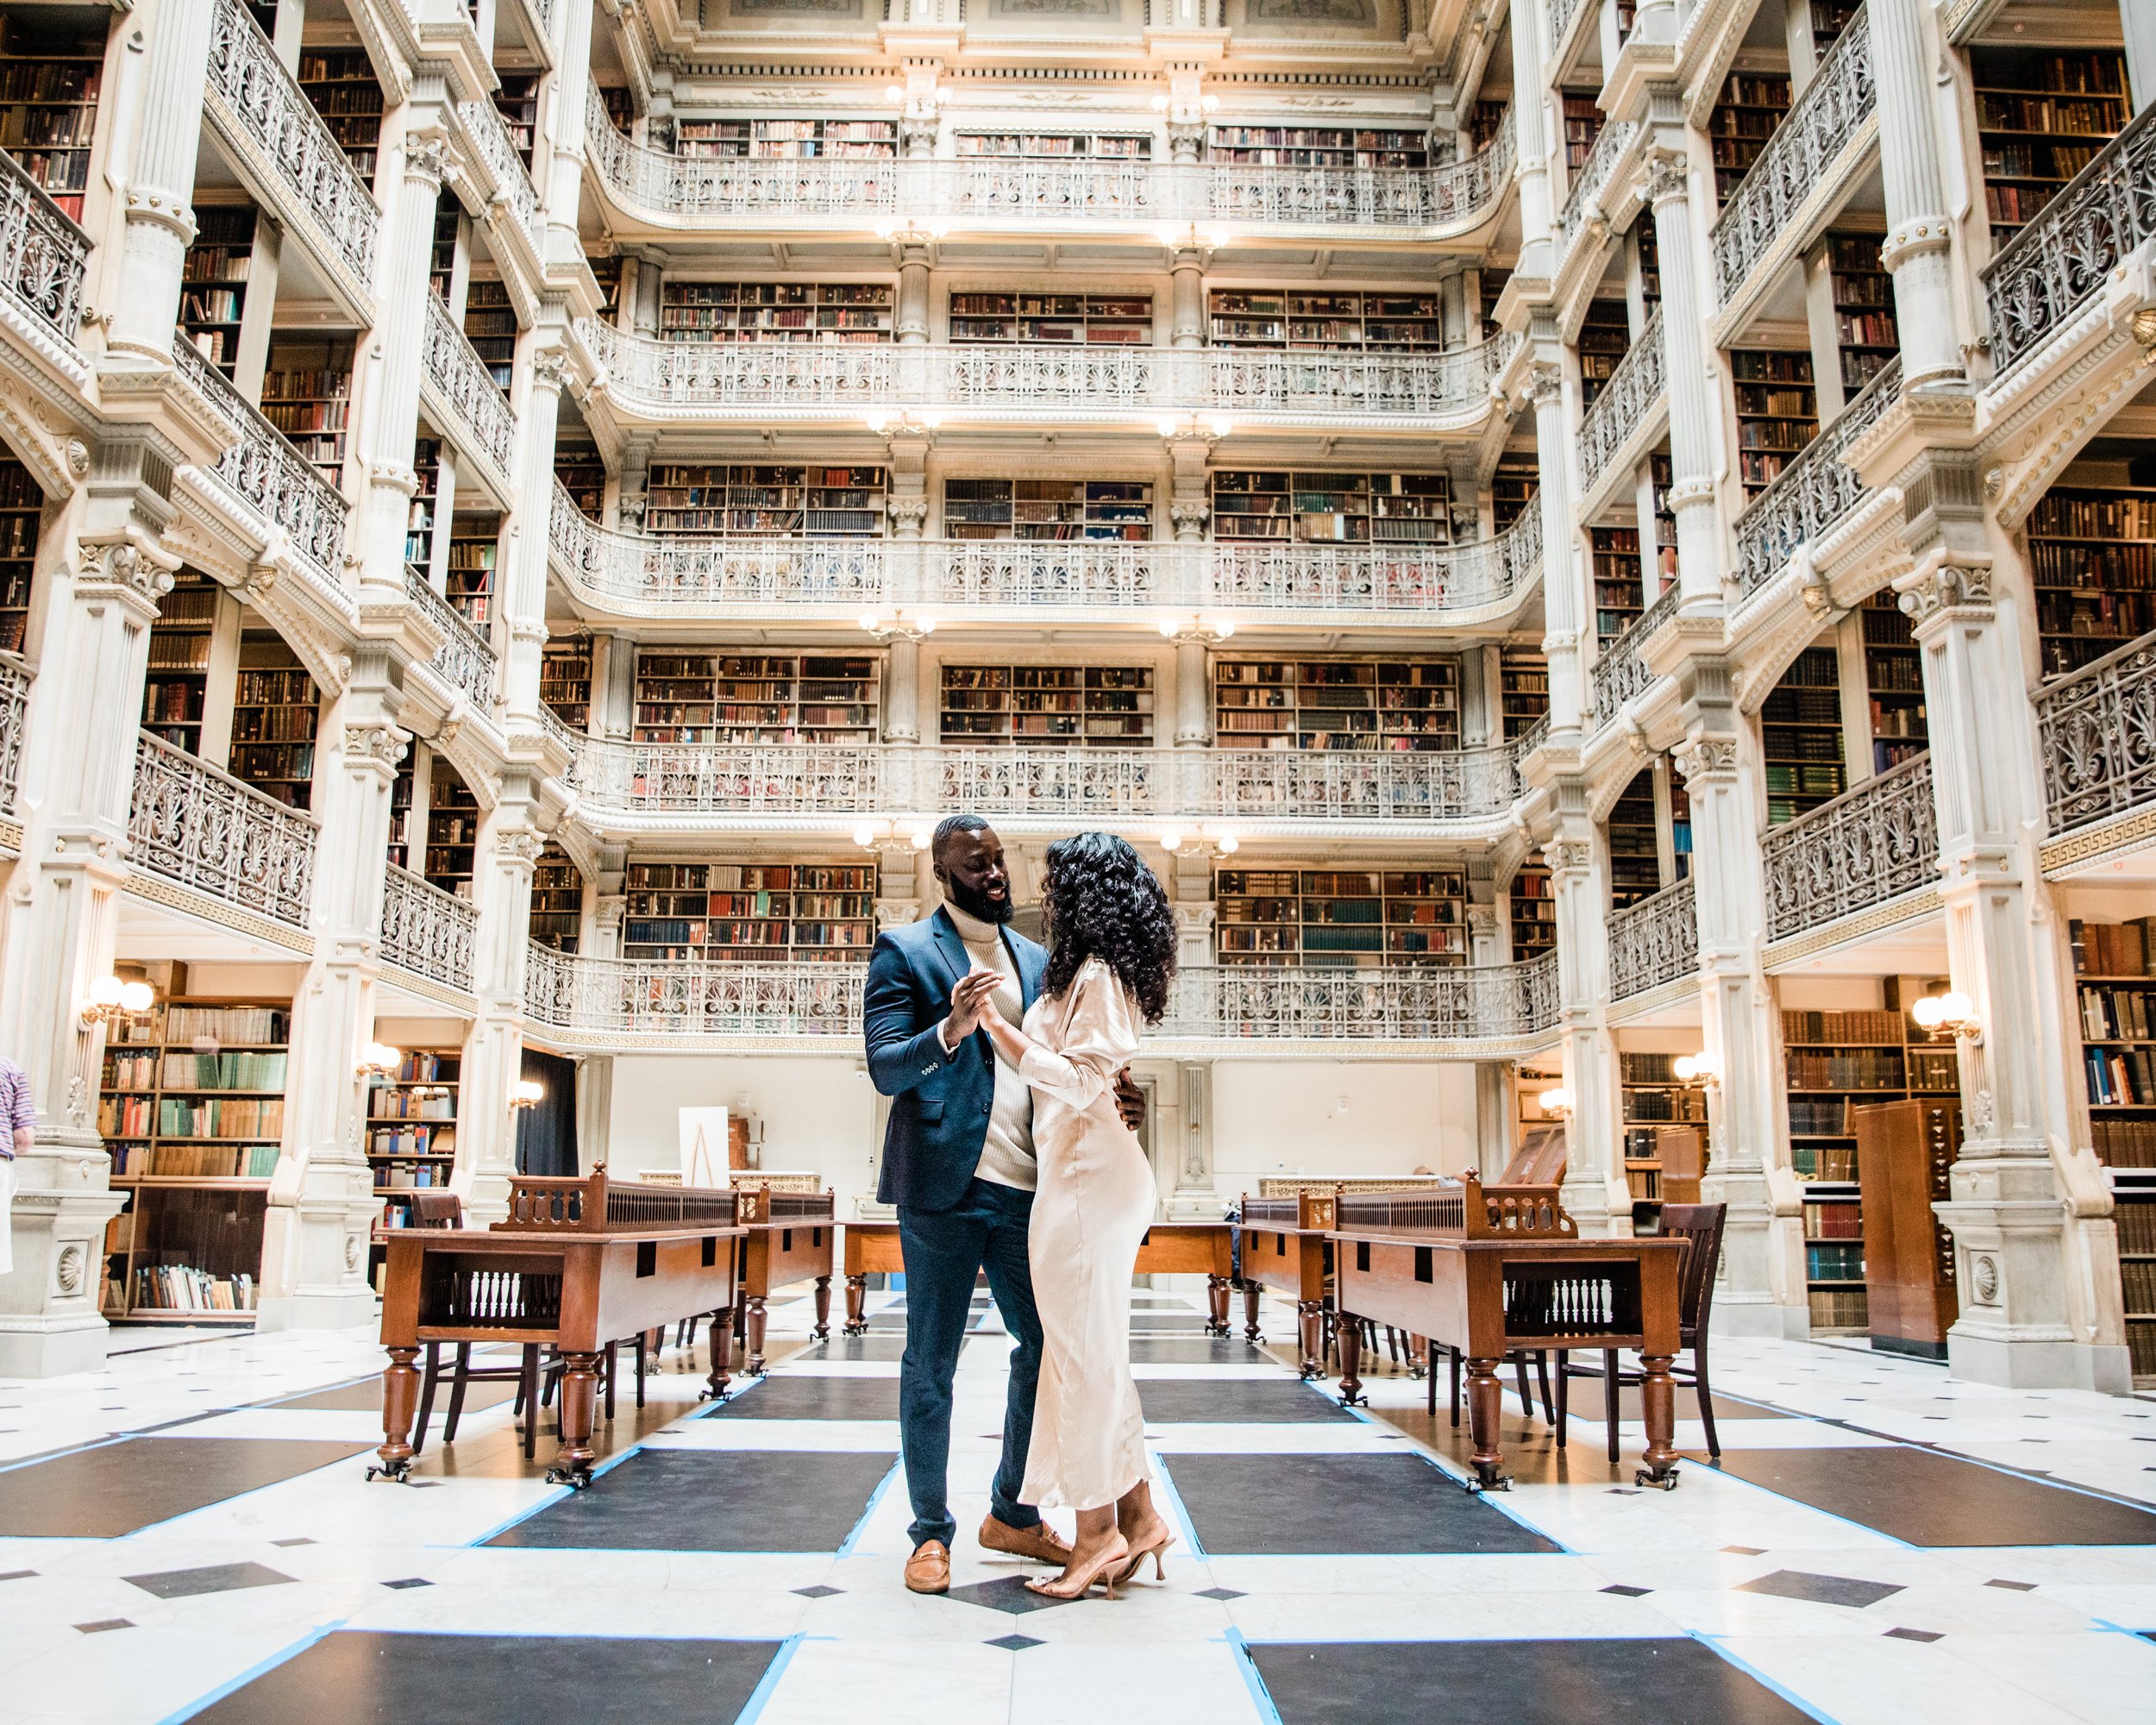 Disney Beauty and The Beast Inspired Engagement Session at The Peabody Library Baltimore Maryland shot by Megapixels Media Photography-13.jpg